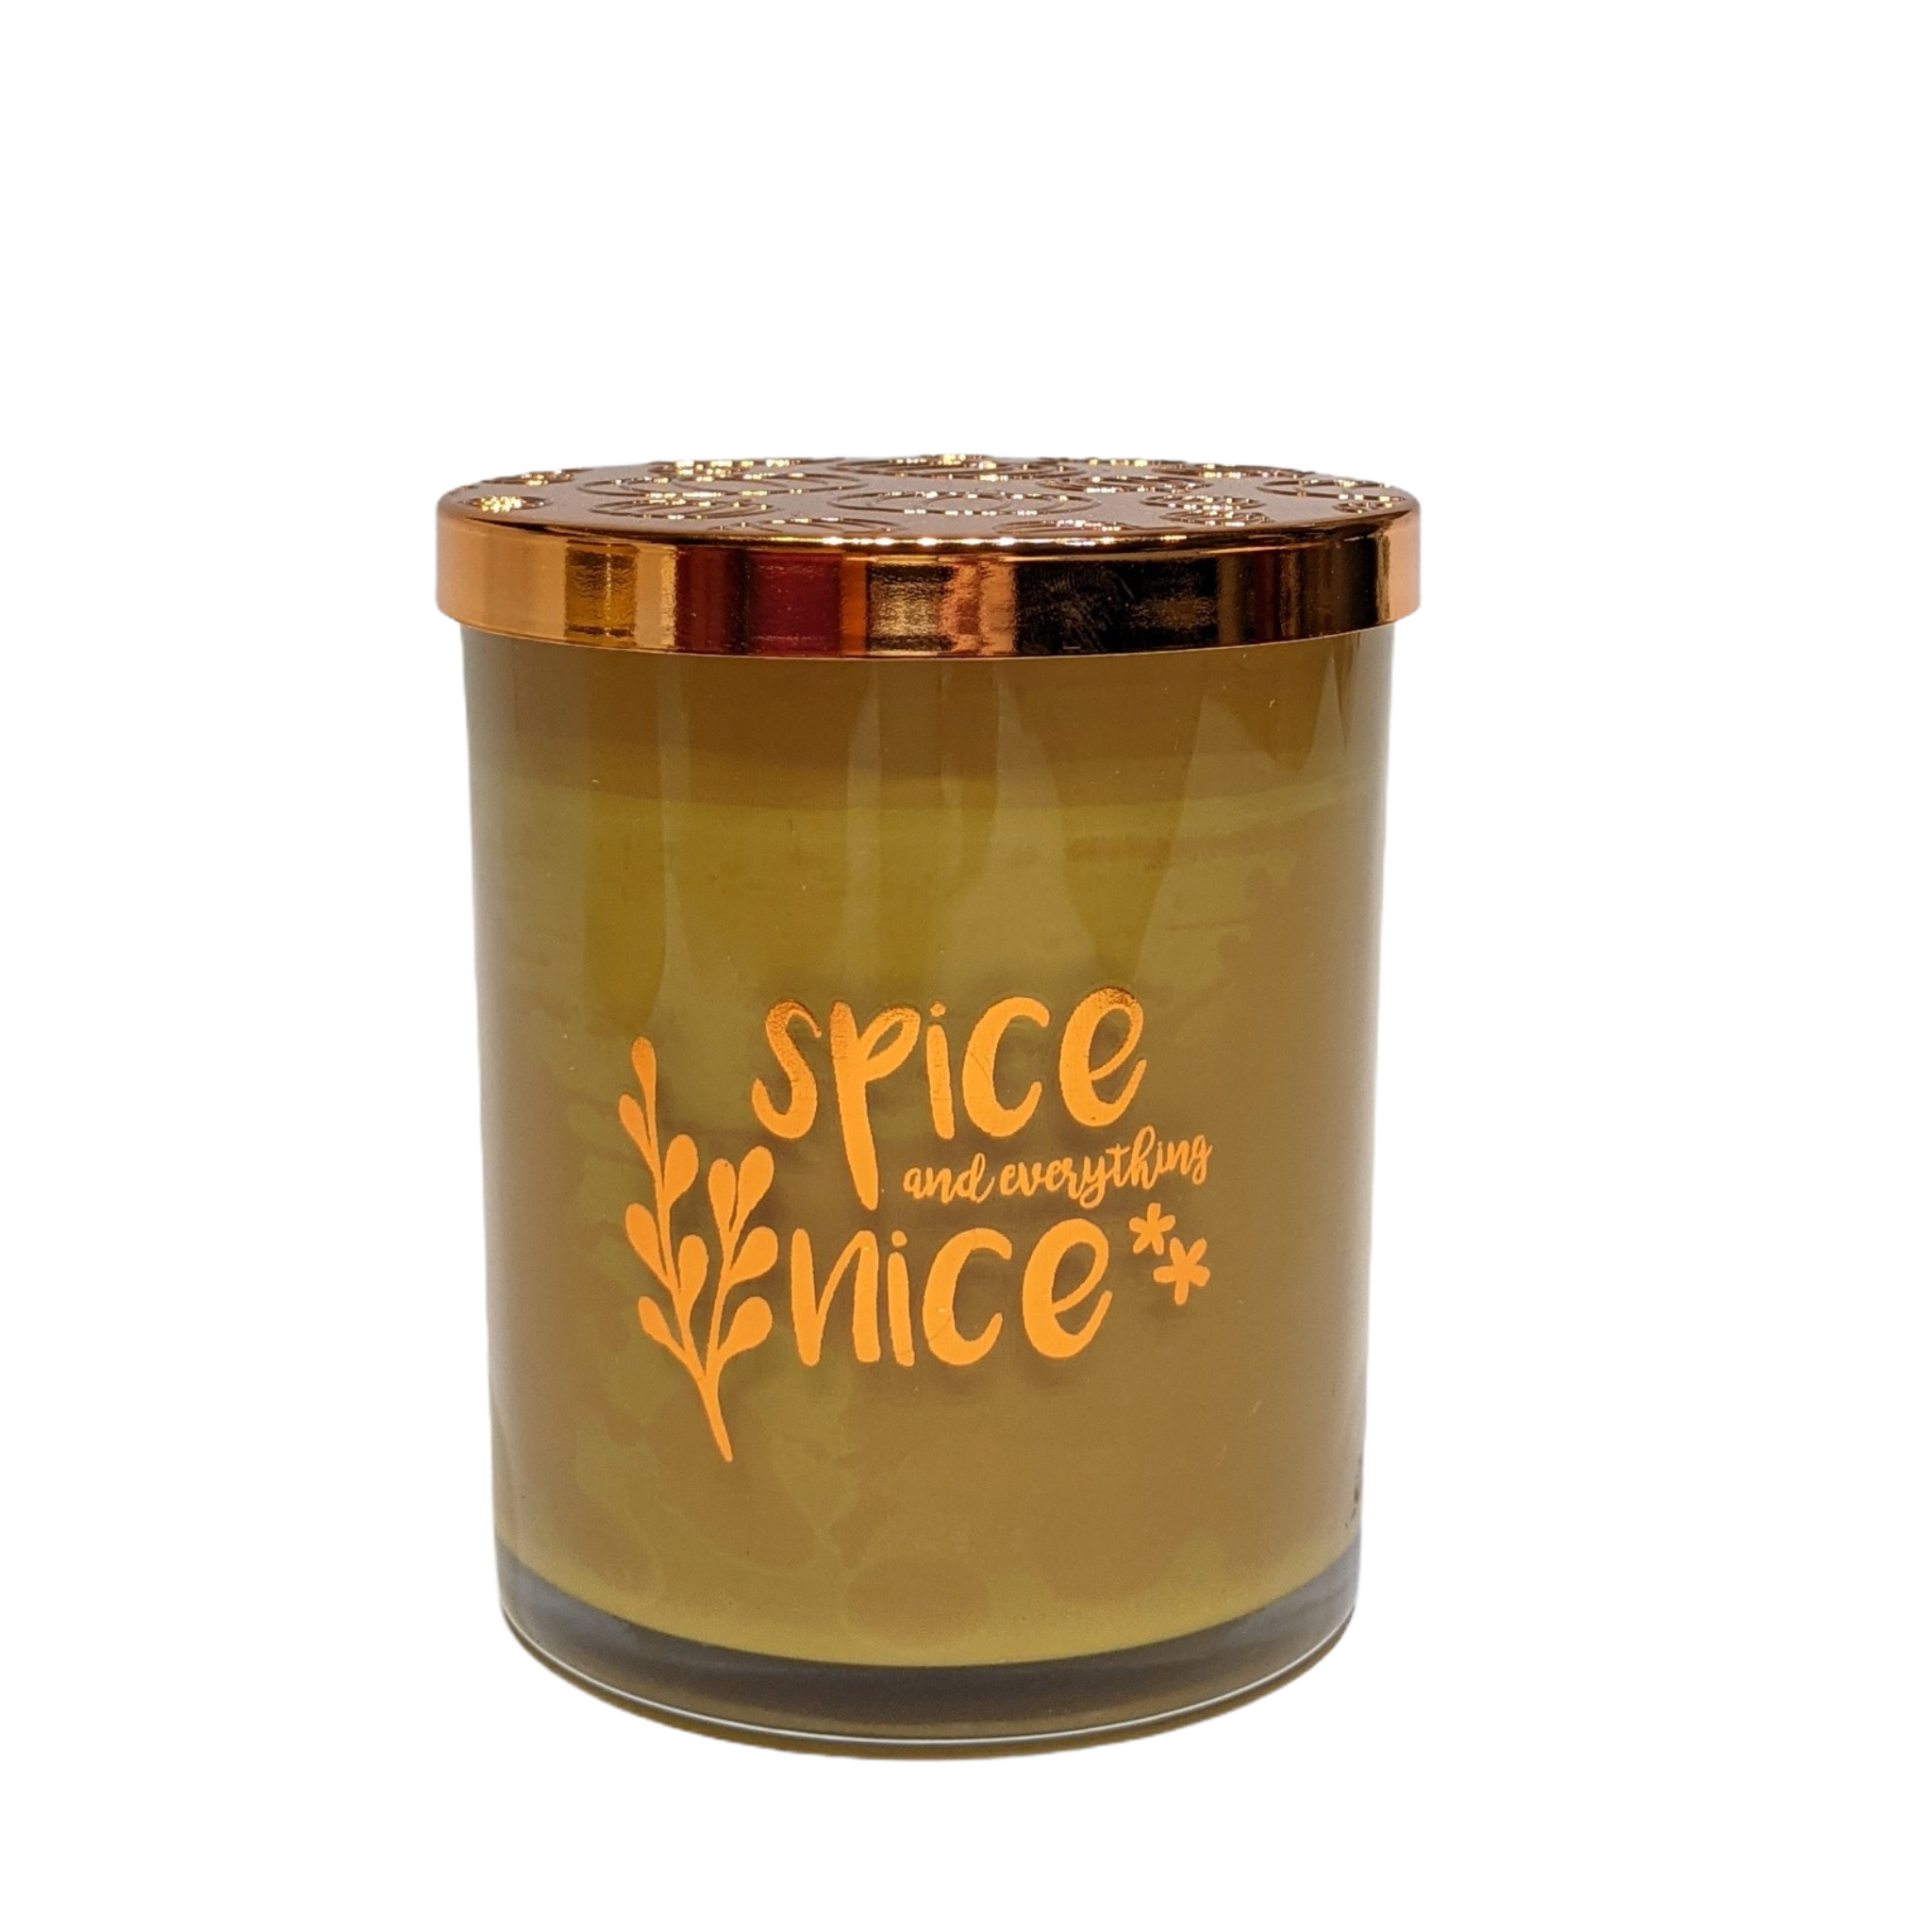 nen-thom-spice-and-everything-nice-700g-11229.png